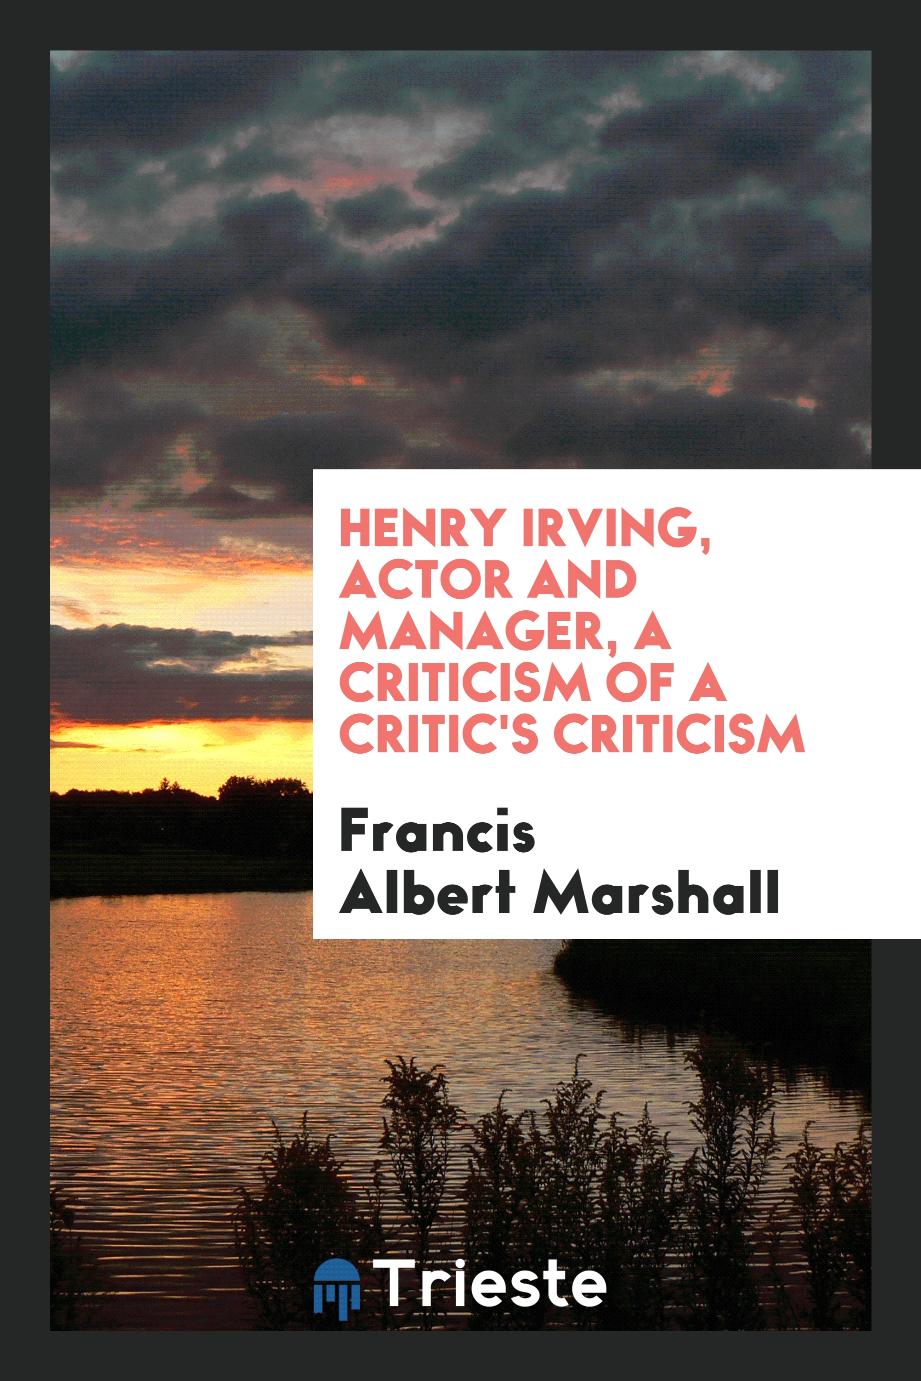 Henry Irving, actor and manager, a criticism of a critic's criticism